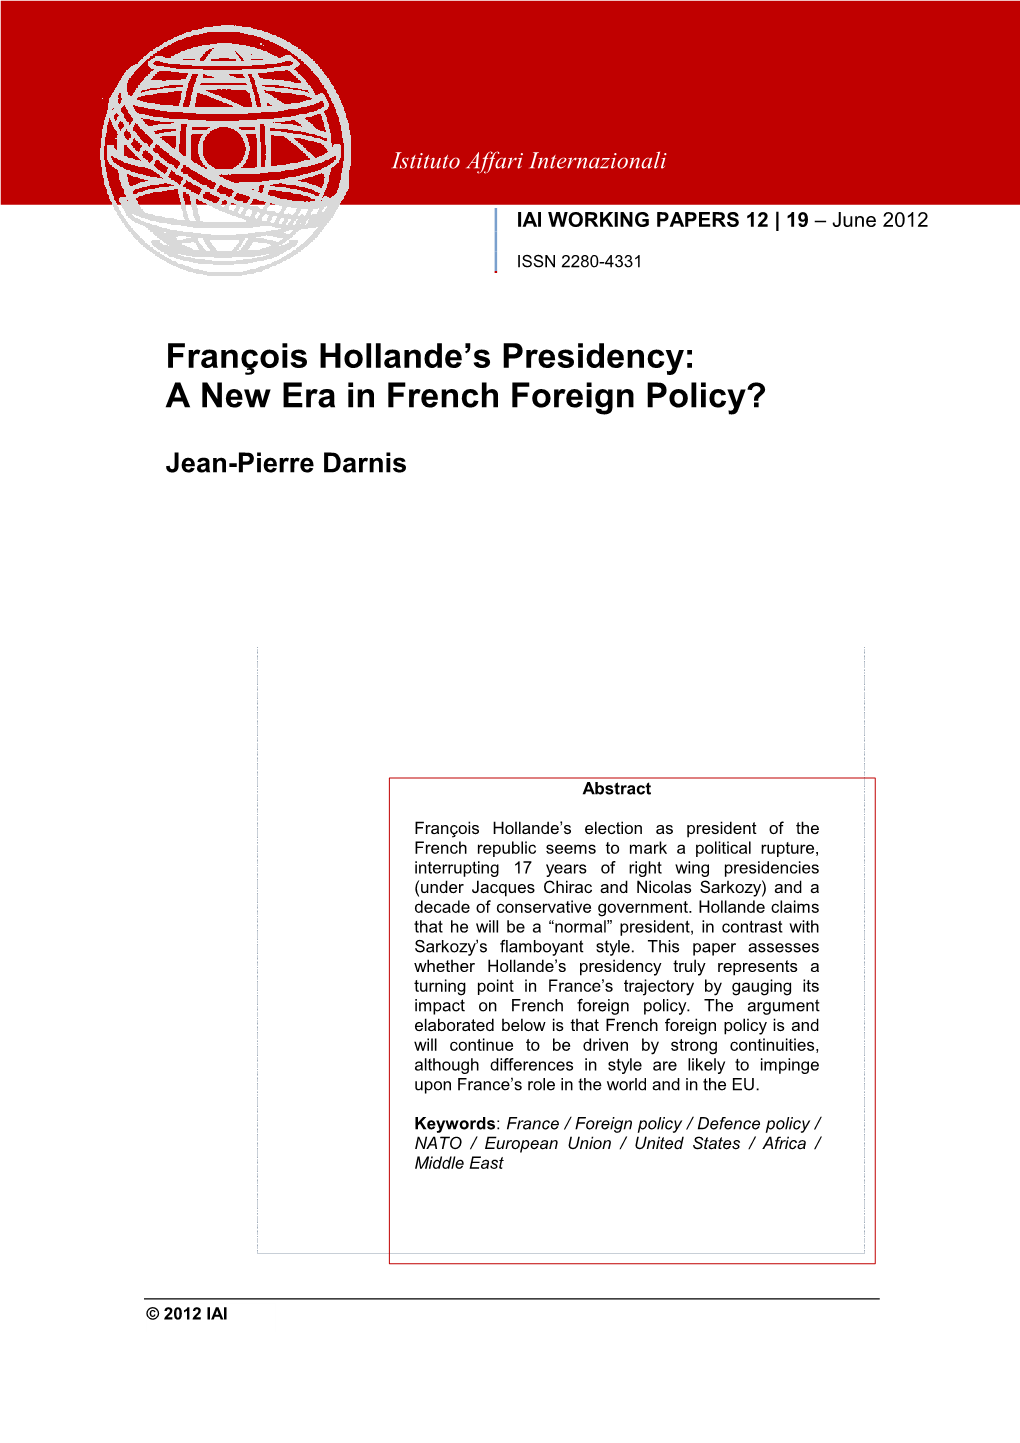 François Hollande's Presidency: a New Era in French Foreign Policy?